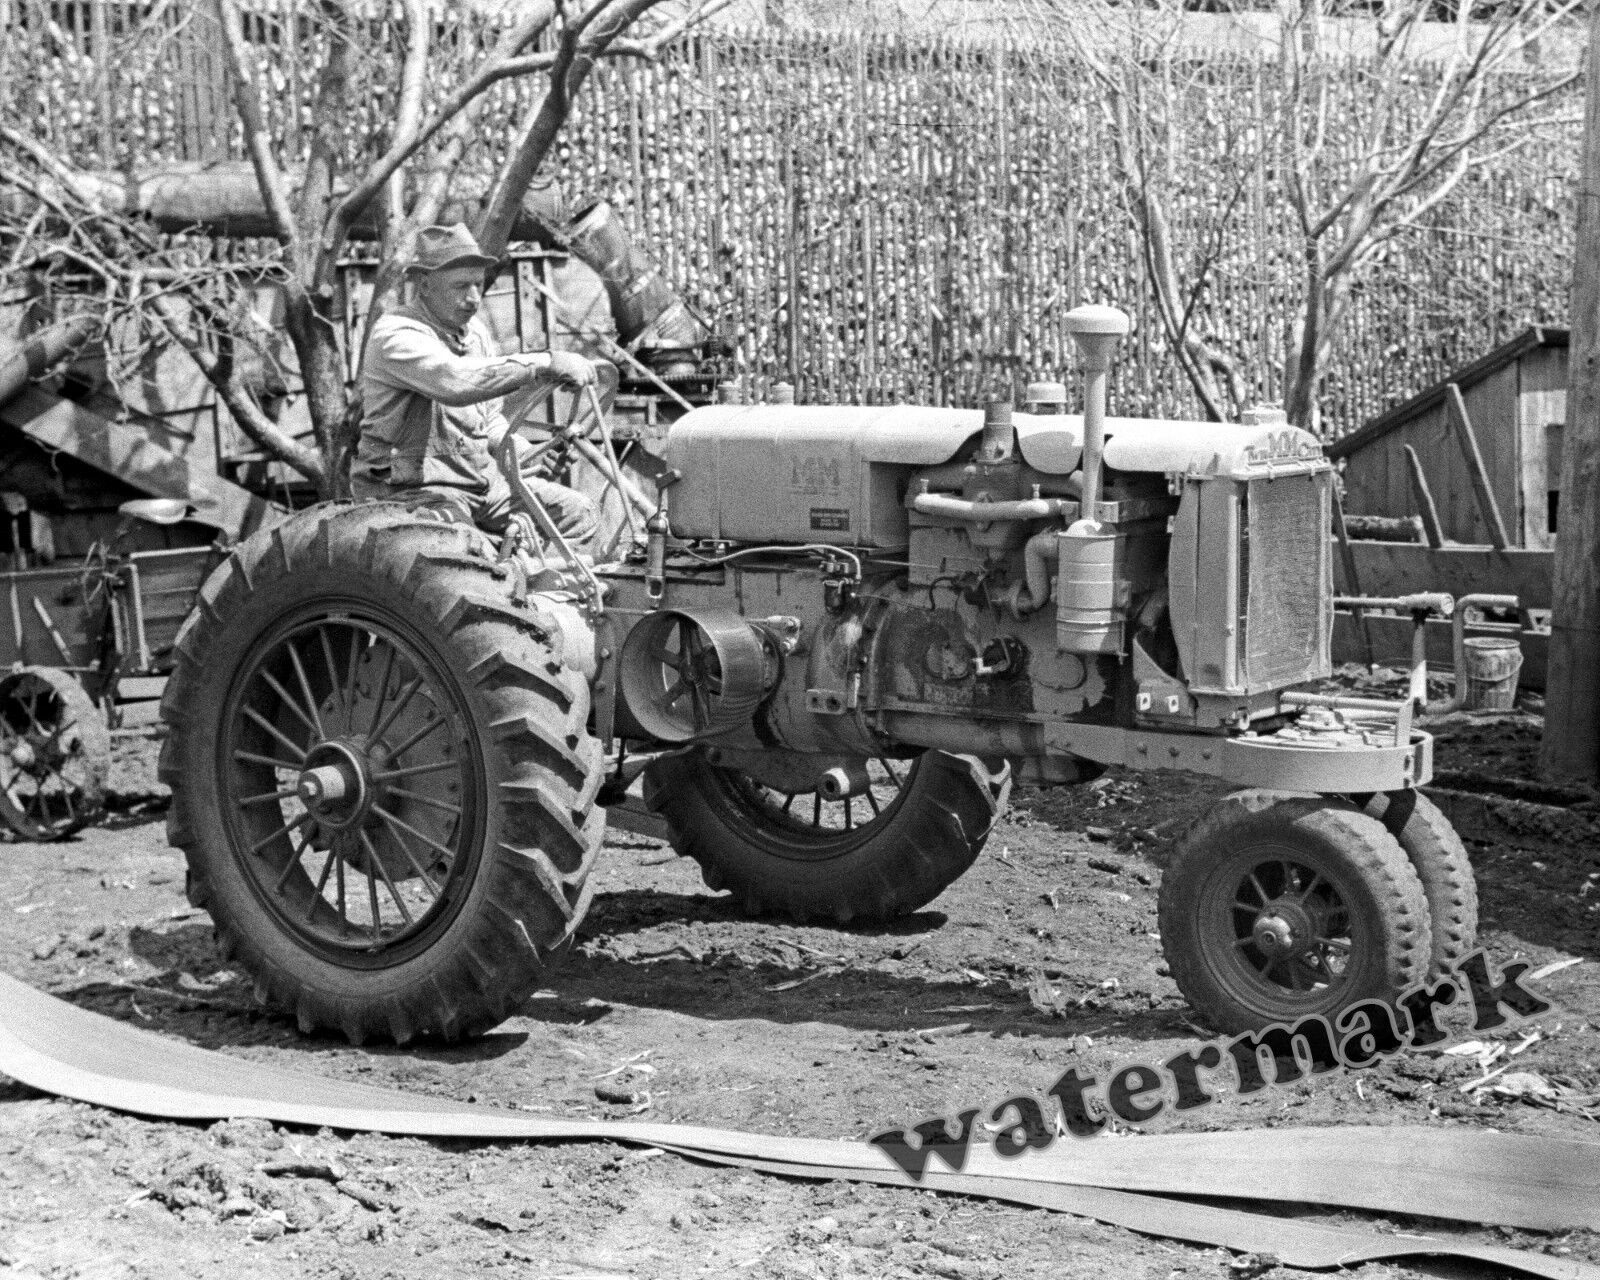 Photograph of a Minneapolis-Moline  Farm Tractor Year 1938 8x10